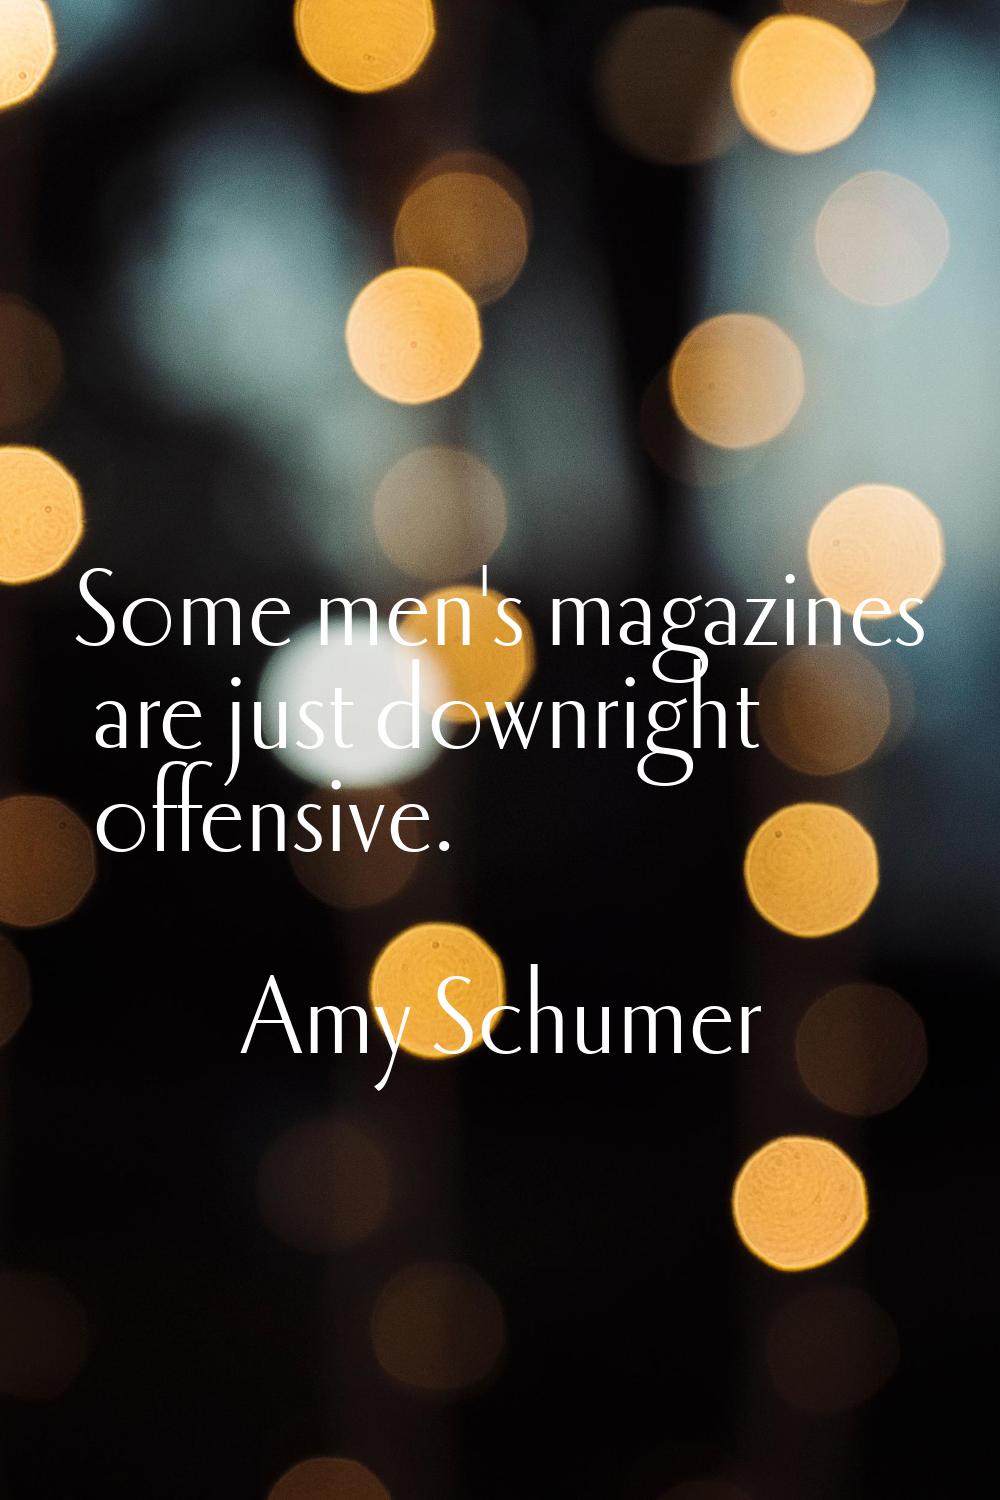 Some men's magazines are just downright offensive.